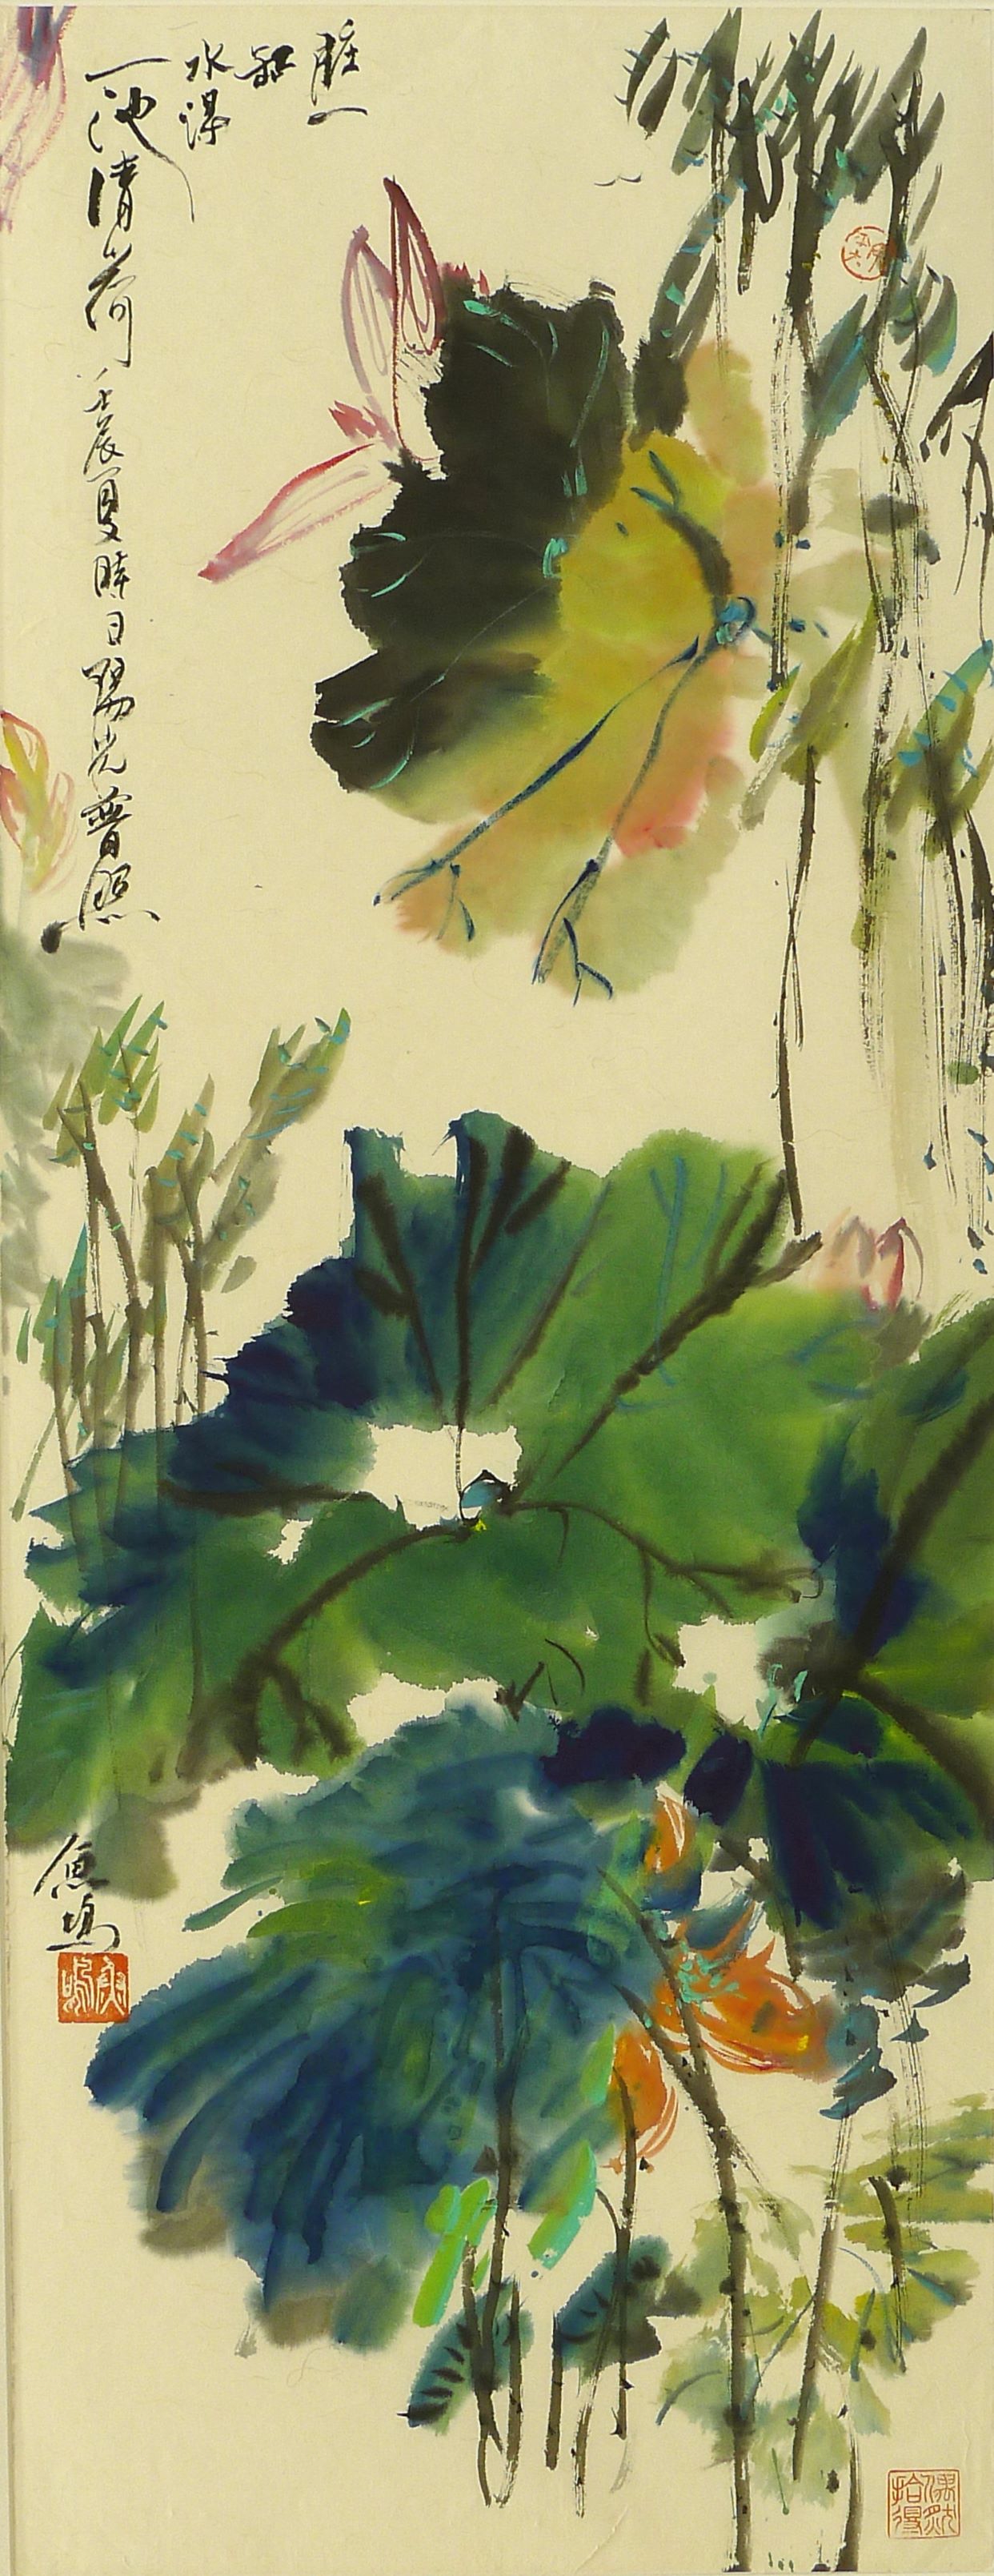 Painting by Yuming Zhu - A Whole Pond of Purity - Continuing Education at Seattle Central College 